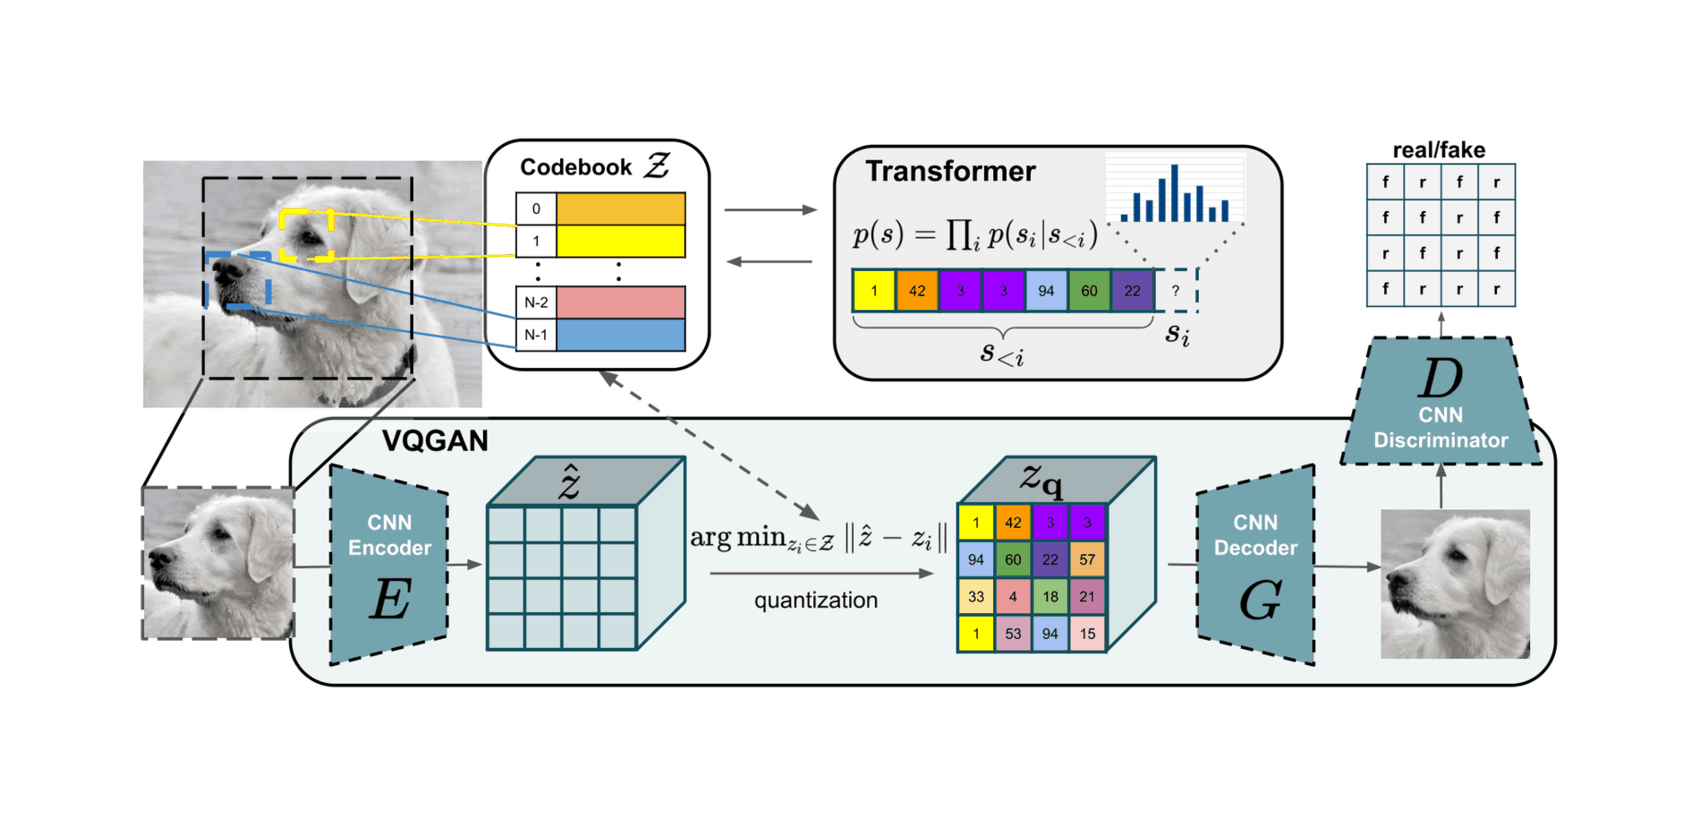 TL;DR: We combine the efficiency of convolutional approaches with the expressivity of transformers by introducing a convolutional VQGAN, which learns a codebook of context-rich visual parts, whose composition is modeled with an autoregressive transformer.